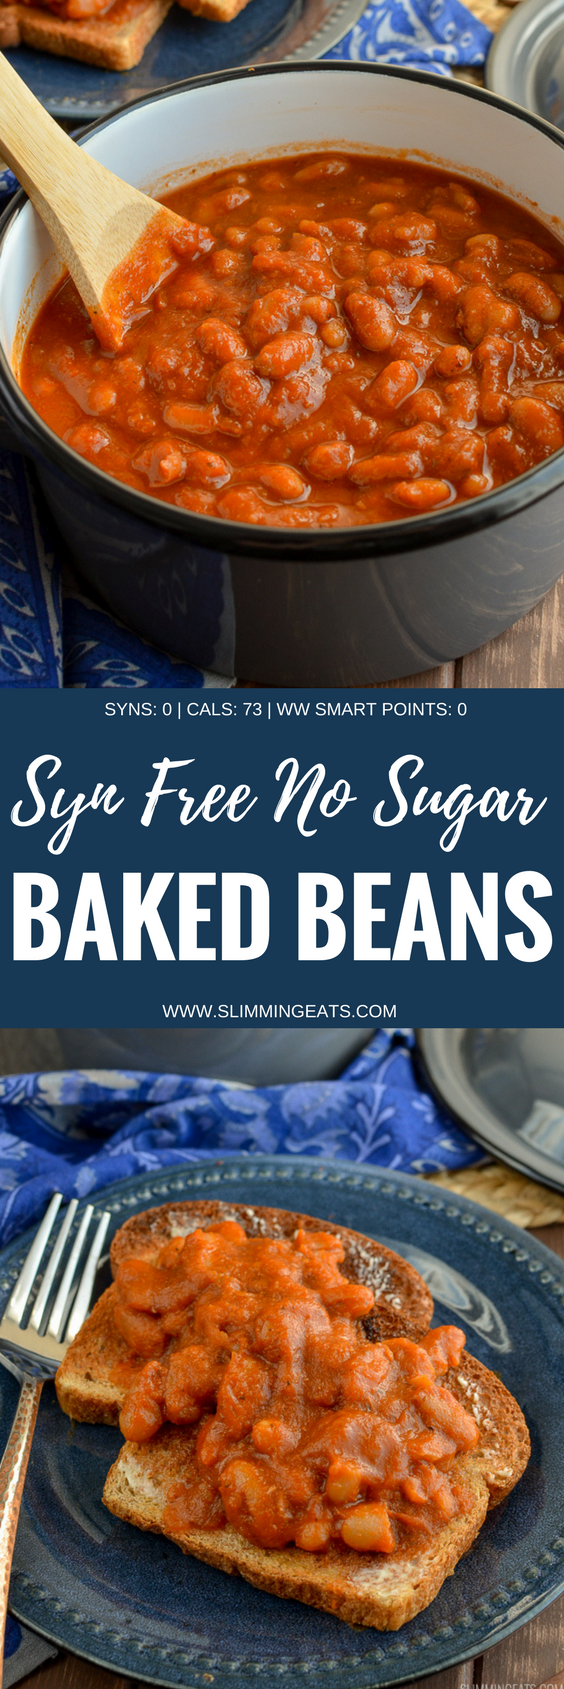 Delicious homemade and Syn Free No Added Sugar Baked Beans - perfect to enjoy at breakfast, lunch or dinner. Gluten Free, Dairy Free, Vegan, Slimming World and Weight Watchers friendly | www.slimmingeats.com